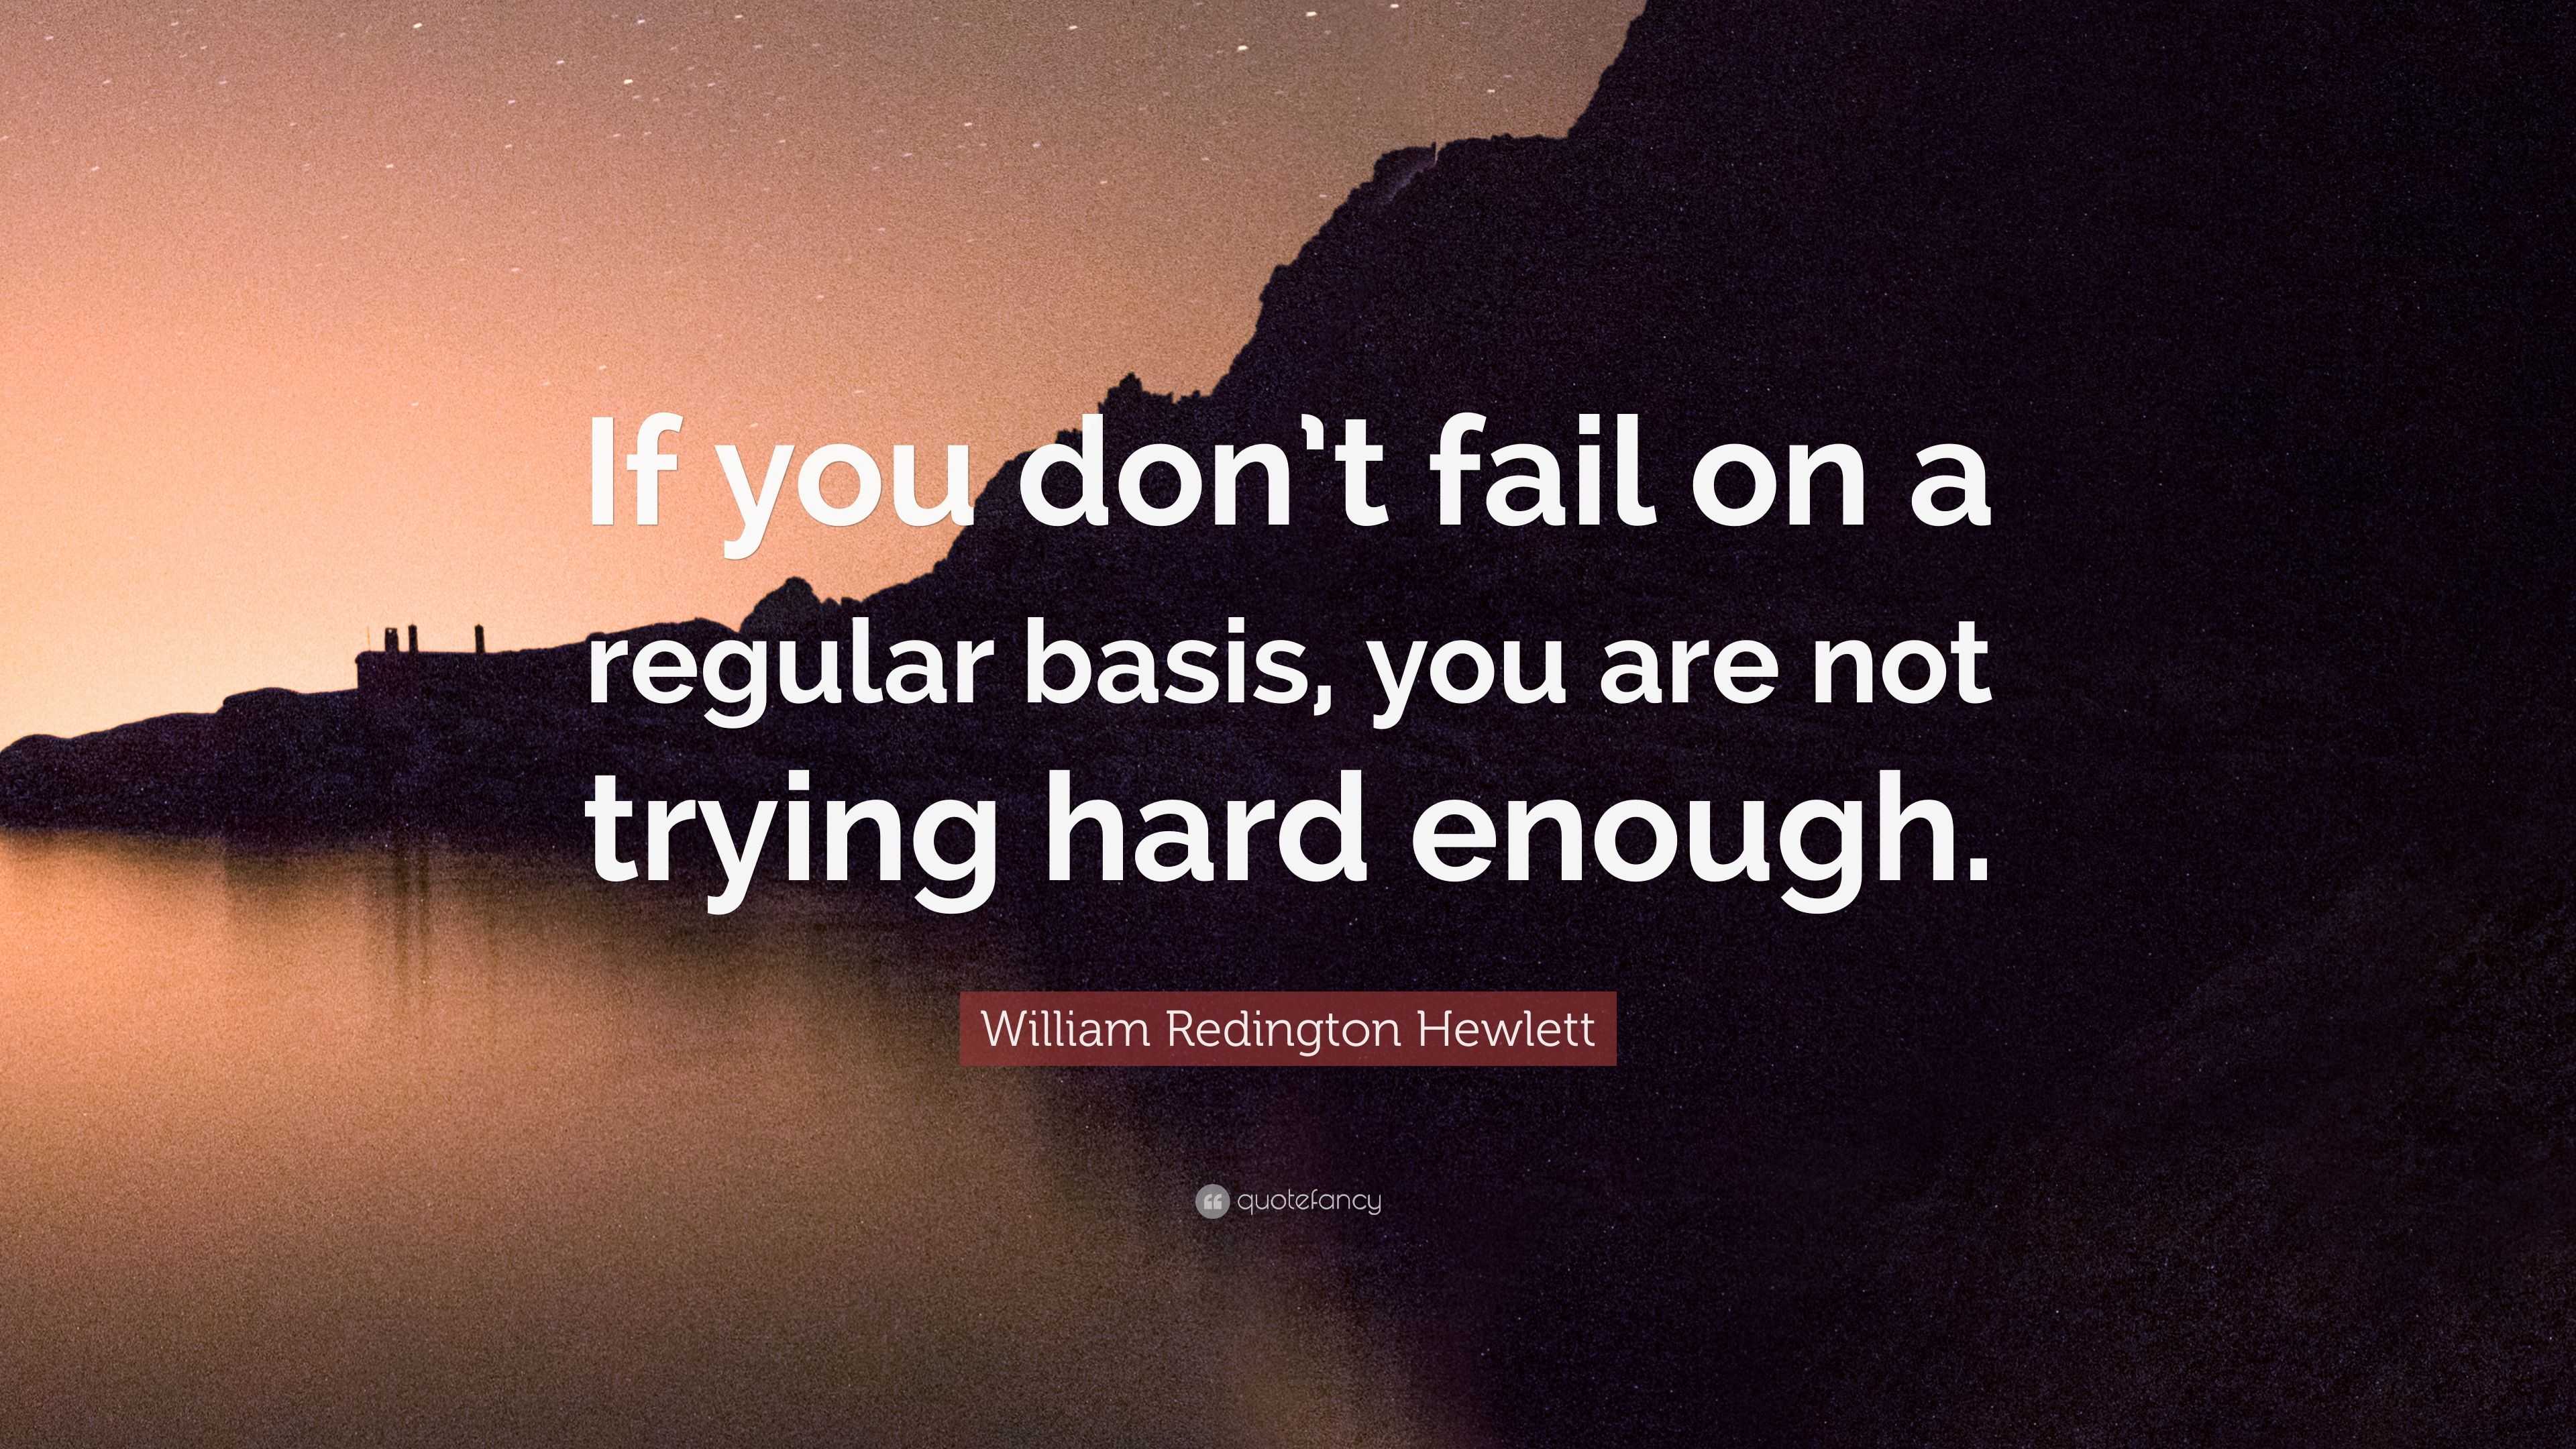 William Redington Hewlett Quote: “If you don’t fail on a regular basis